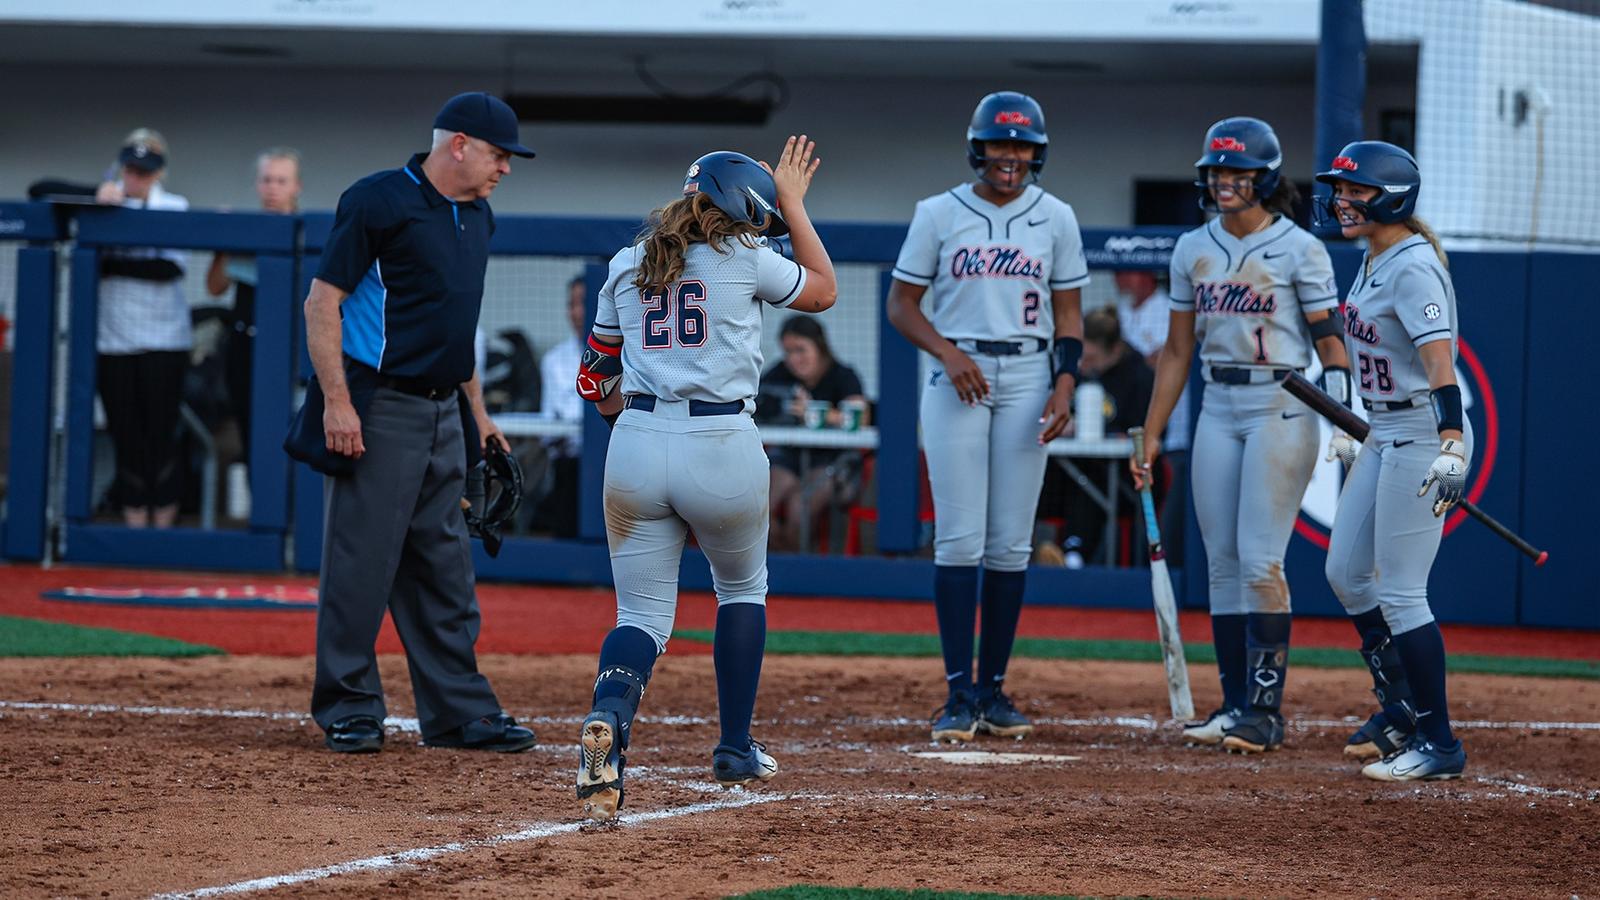 Rebels Take Down Southern Miss: DeLeon and Brady Lead Ole Miss to Victory in Softball Game